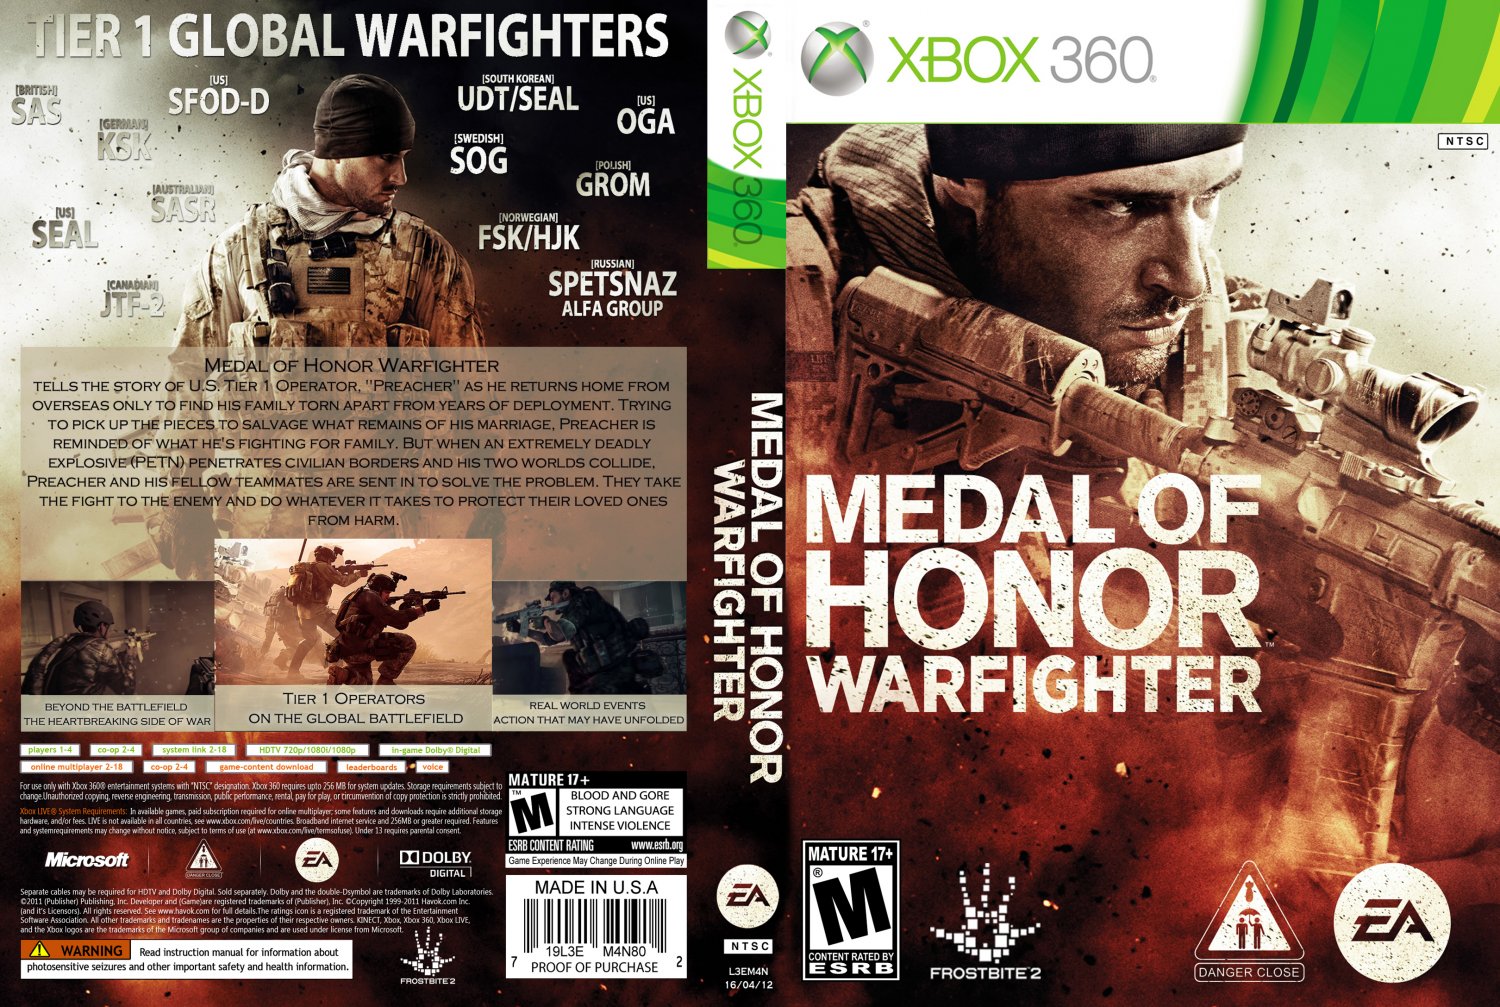 Medal of honor xbox 360. Игра Medal of Honor. Medal of Honor Warfighter Xbox 360. Medal of Honor Warfighter Xbox 360 Disk. Xbox 360 обложка диска Medal of Honor Warfighter.